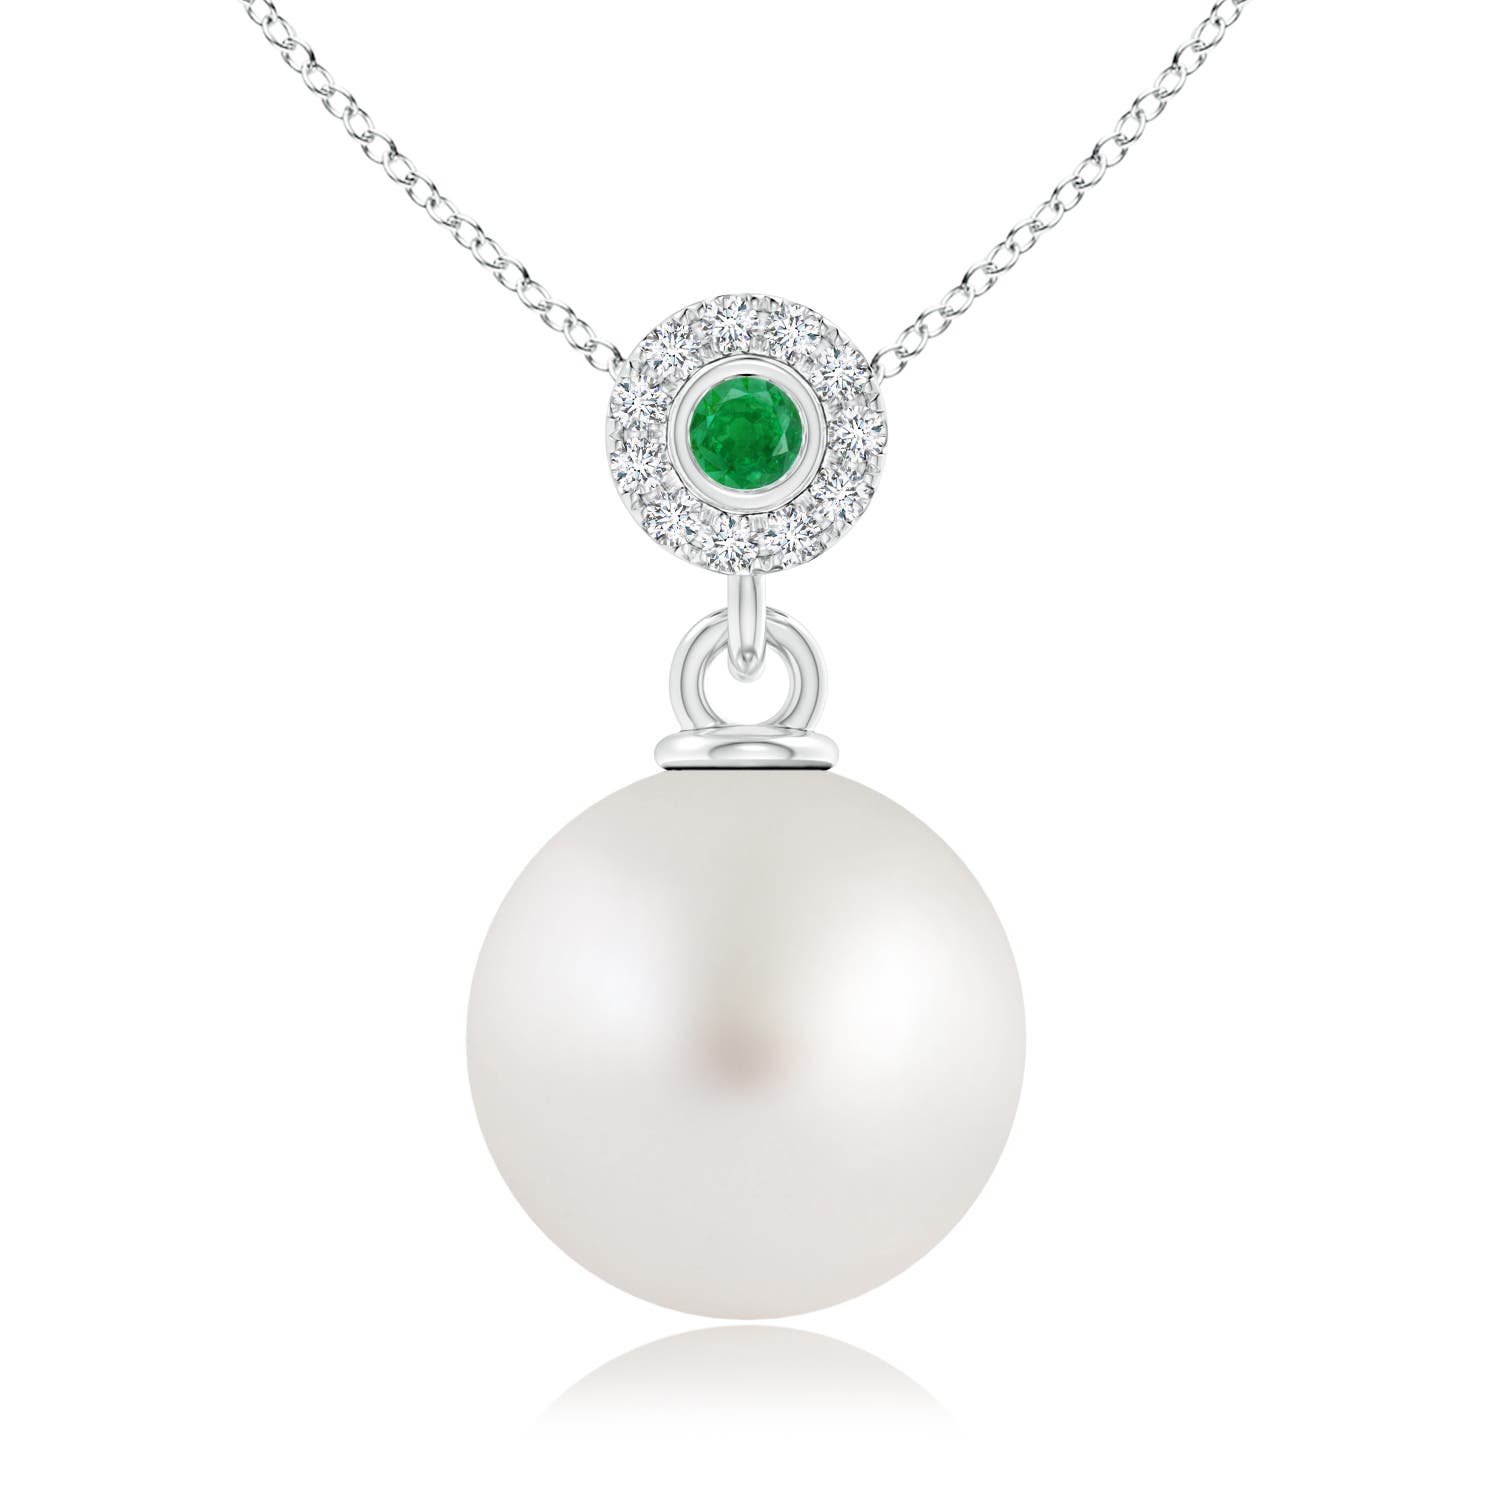 AA - South Sea Cultured Pearl / 7.3 CT / 14 KT White Gold